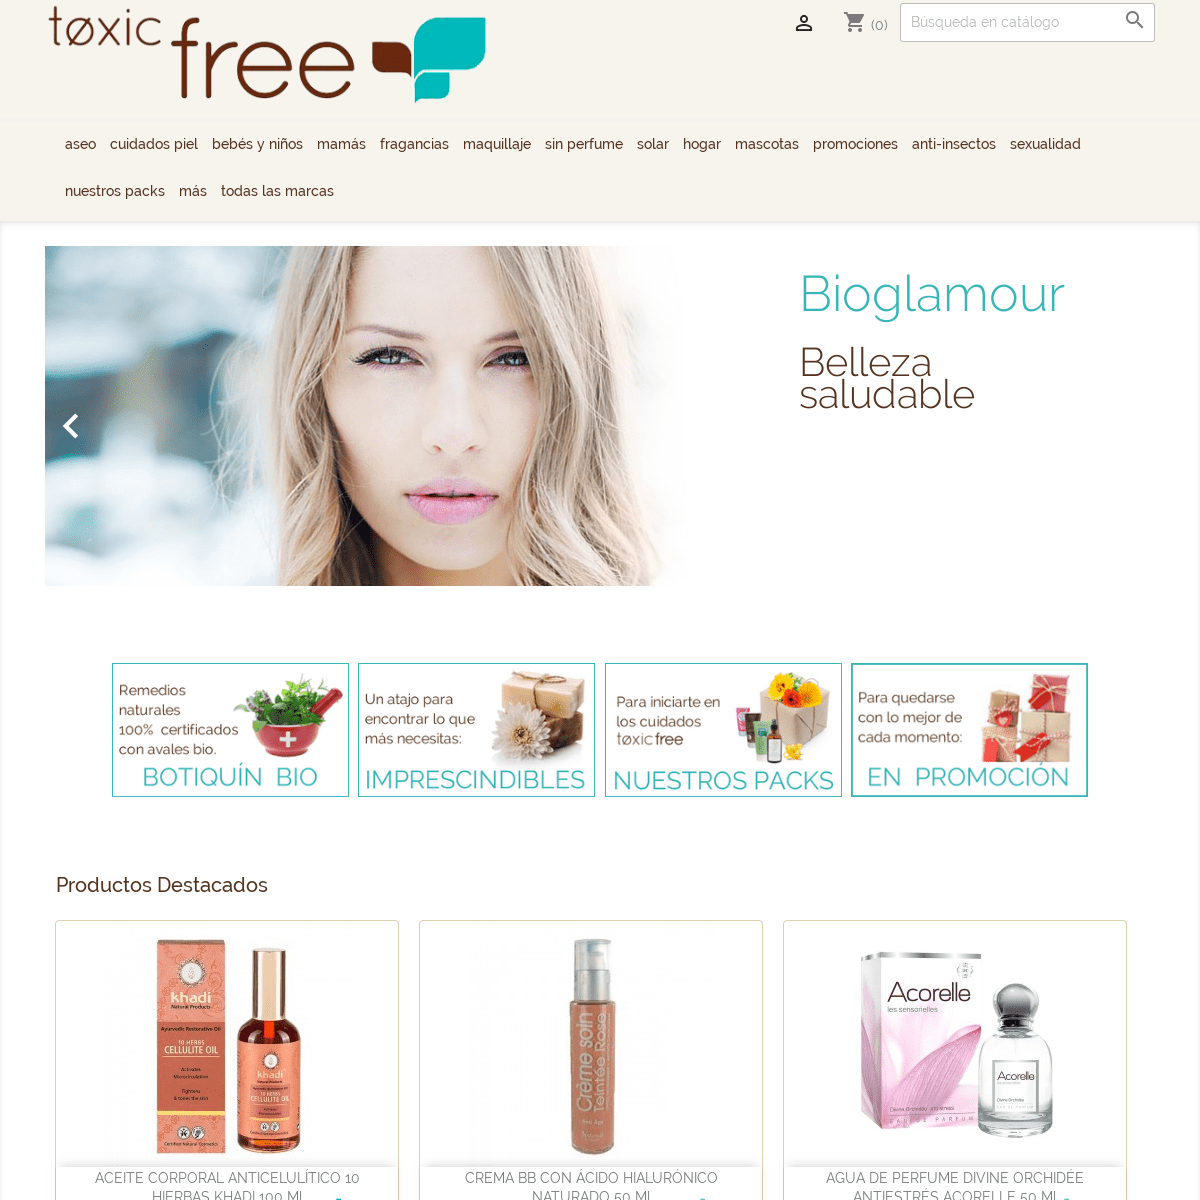 A complete backup of toxicfree.es